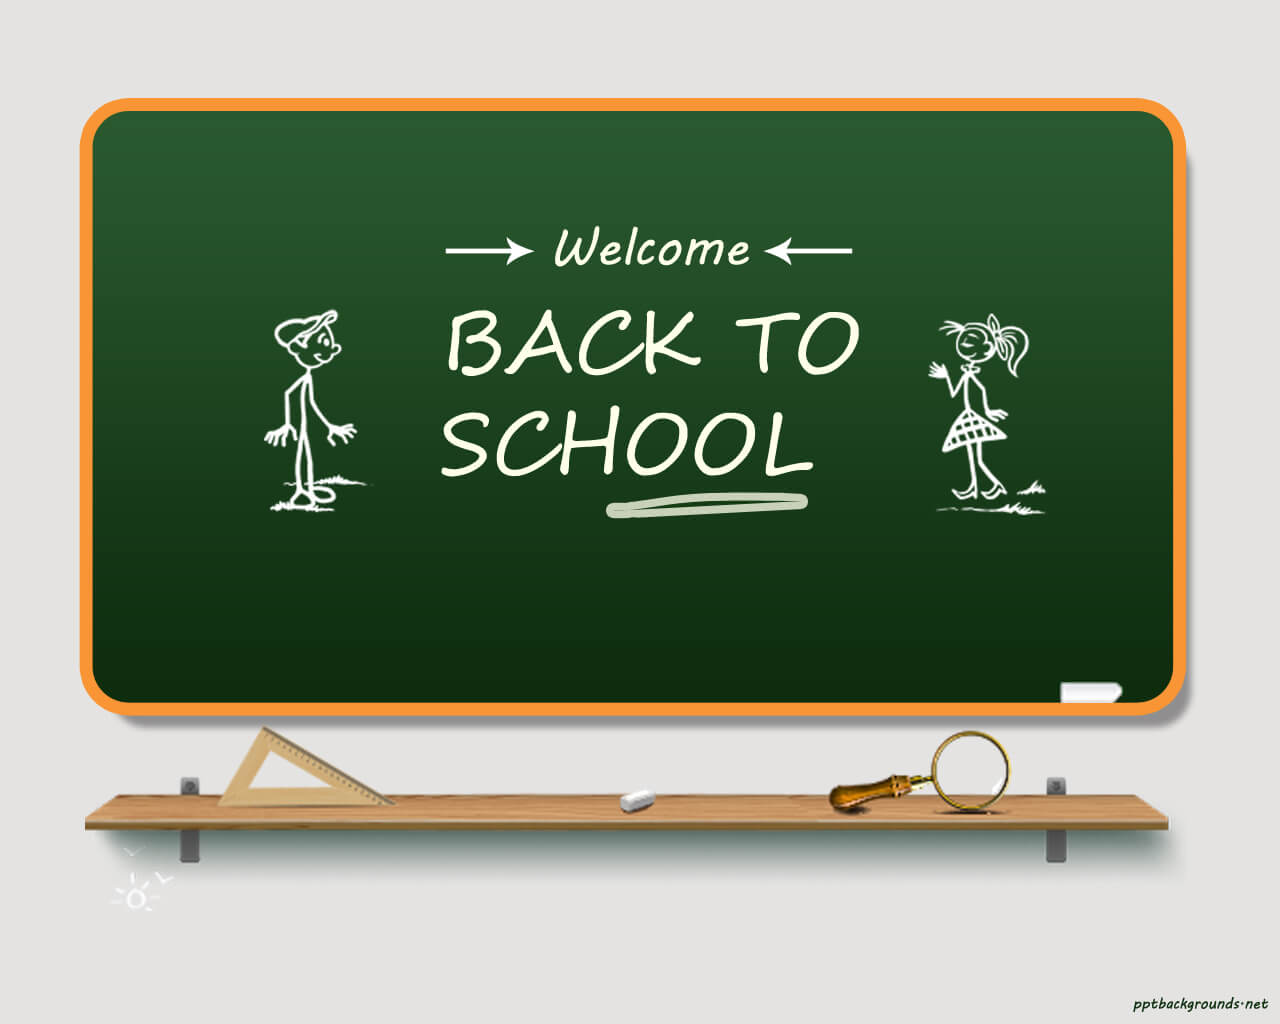 Back To School 2014 – 2015 Backgrounds For Powerpoint Inside Back To School Powerpoint Template